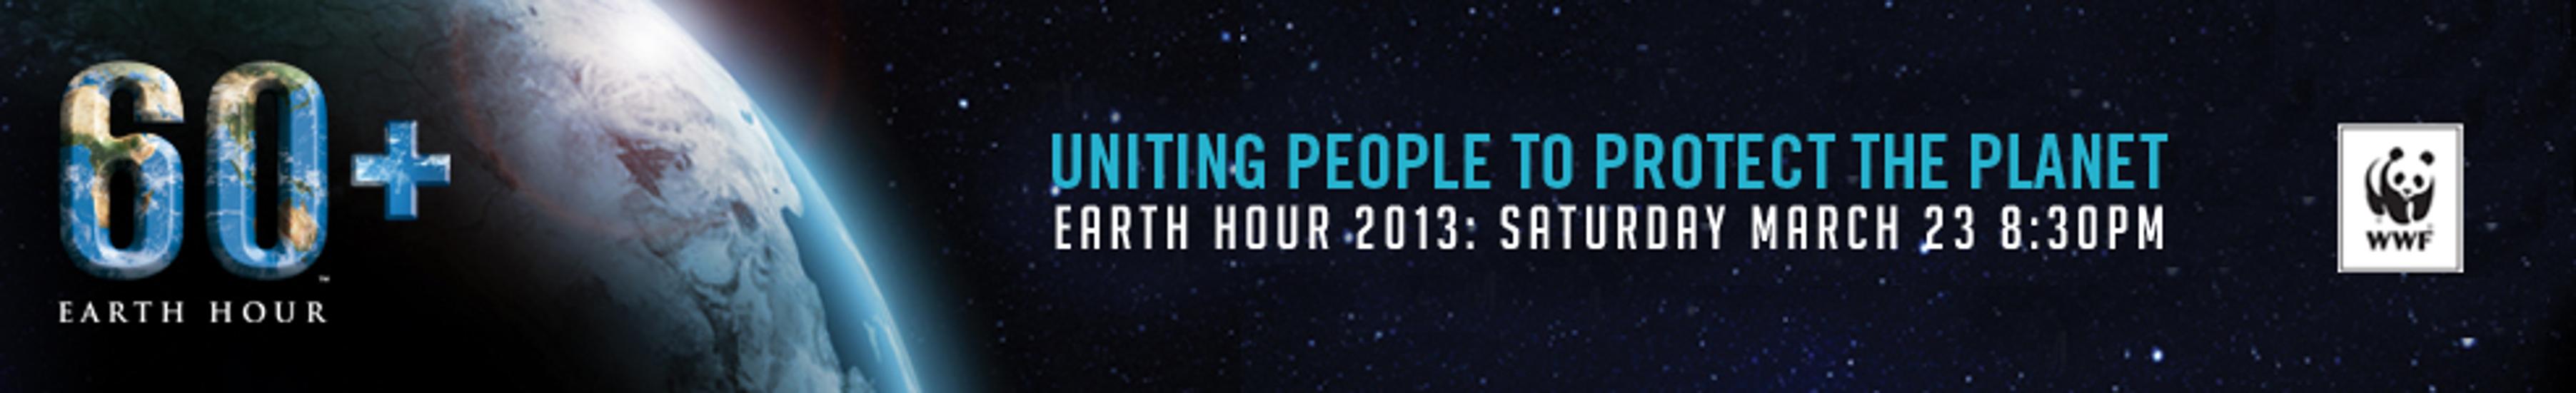 Hungary Supports Earth Hour 2013 On Saturday, 23 March